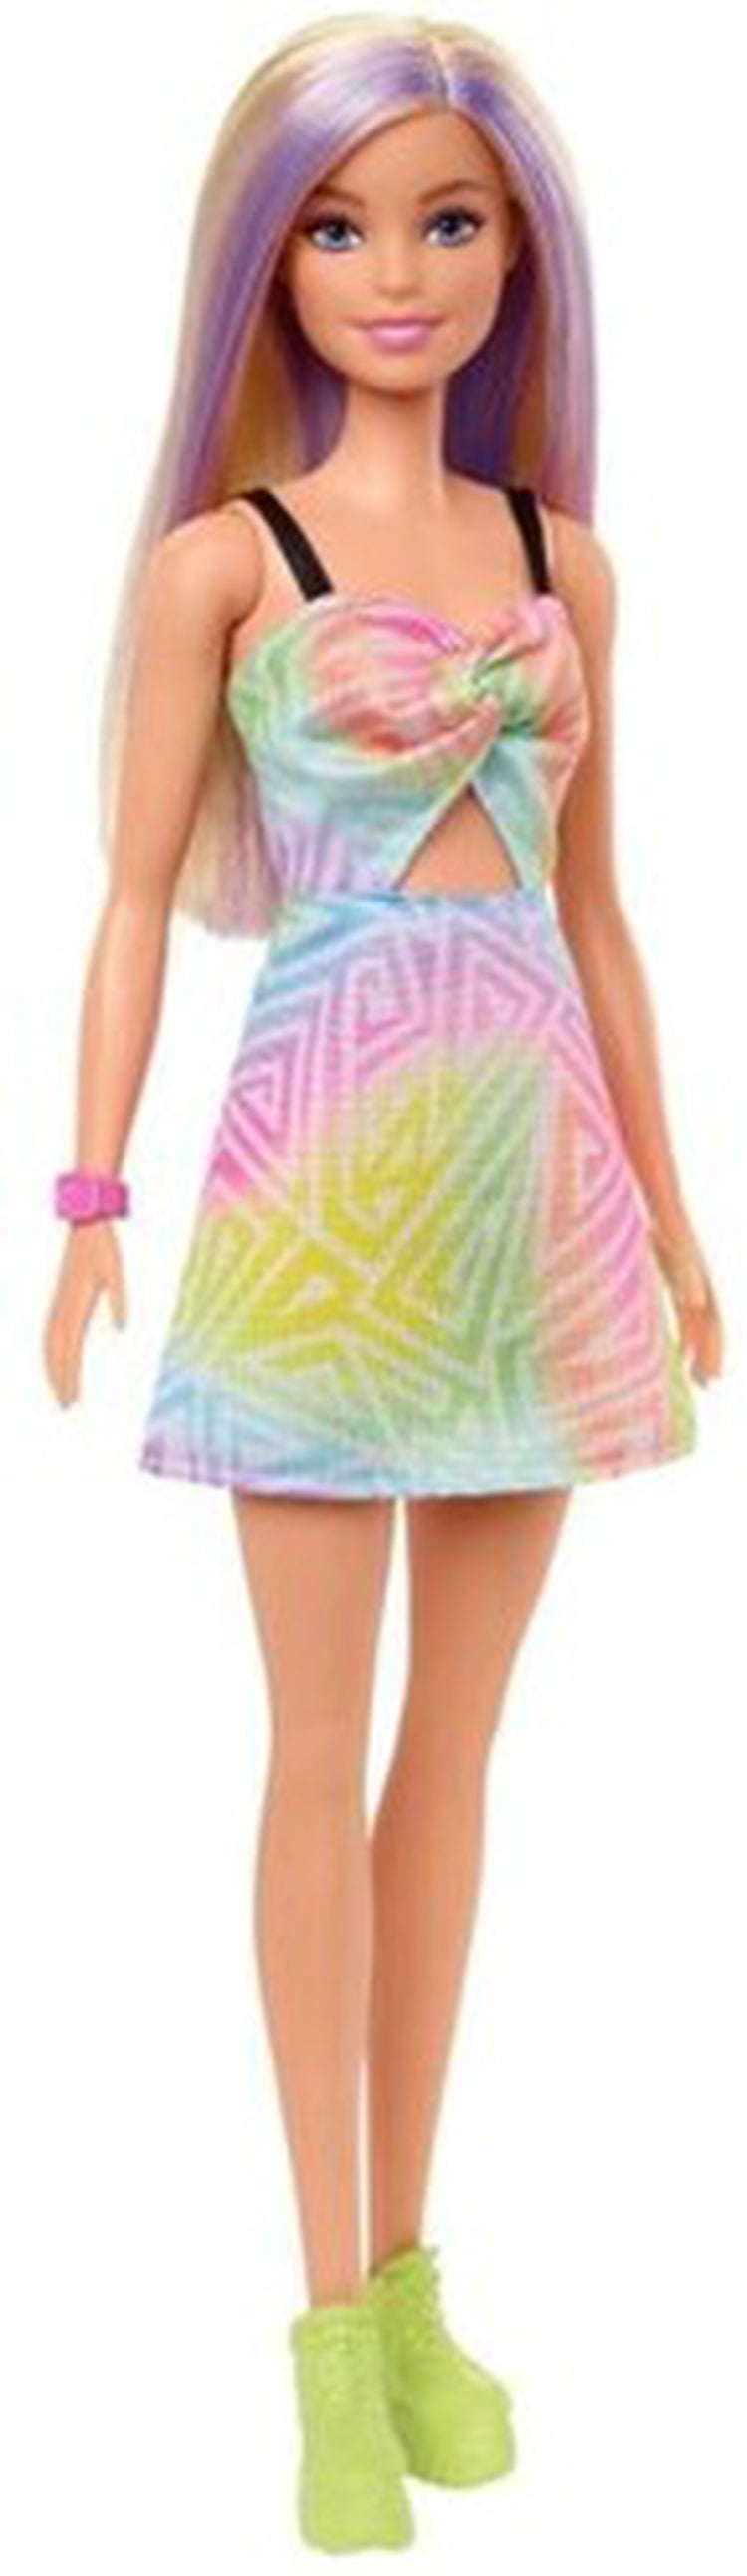 Mattel - Barbie Fashionista Doll, Multi-color Geometric Romper, Pink Watch, Green Boots and Blonde Hair with a Purple Stripe